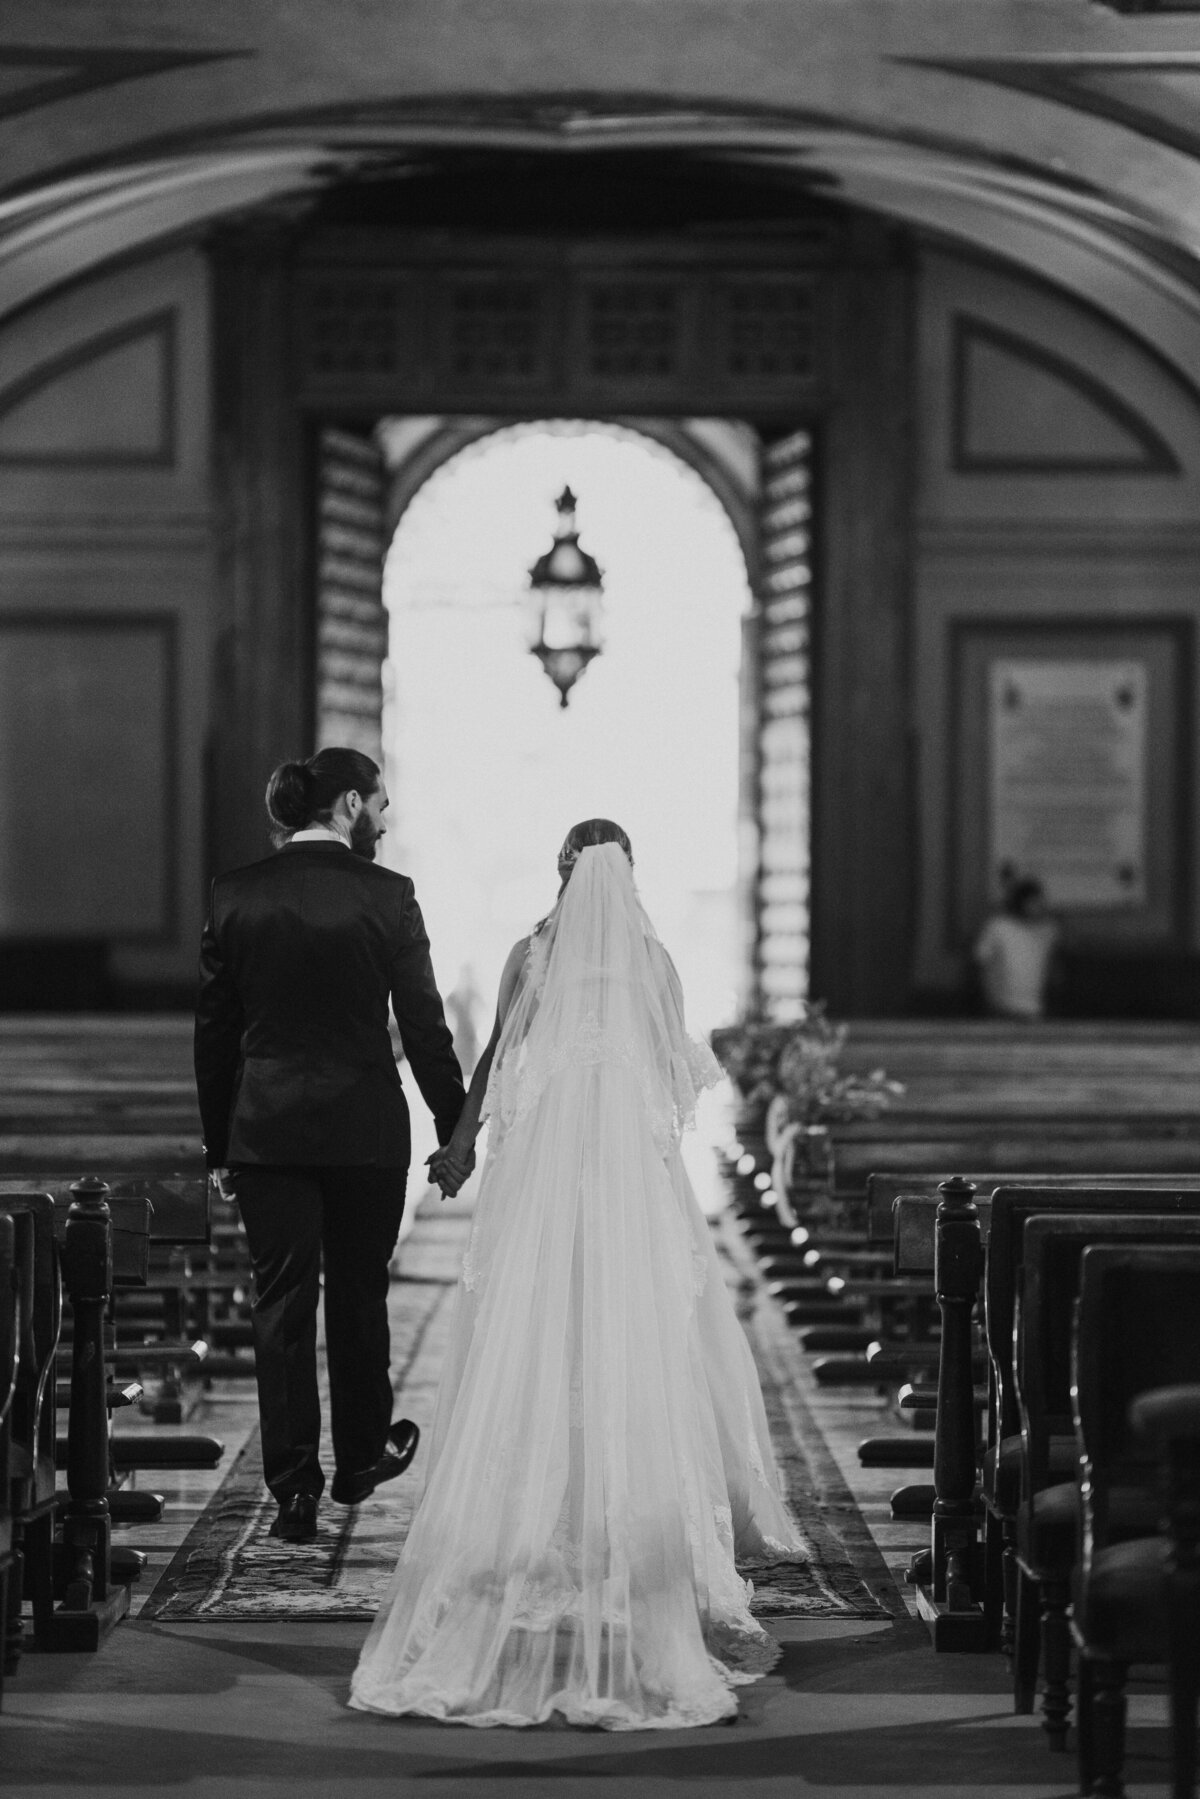 Walking down the aisle after getting married